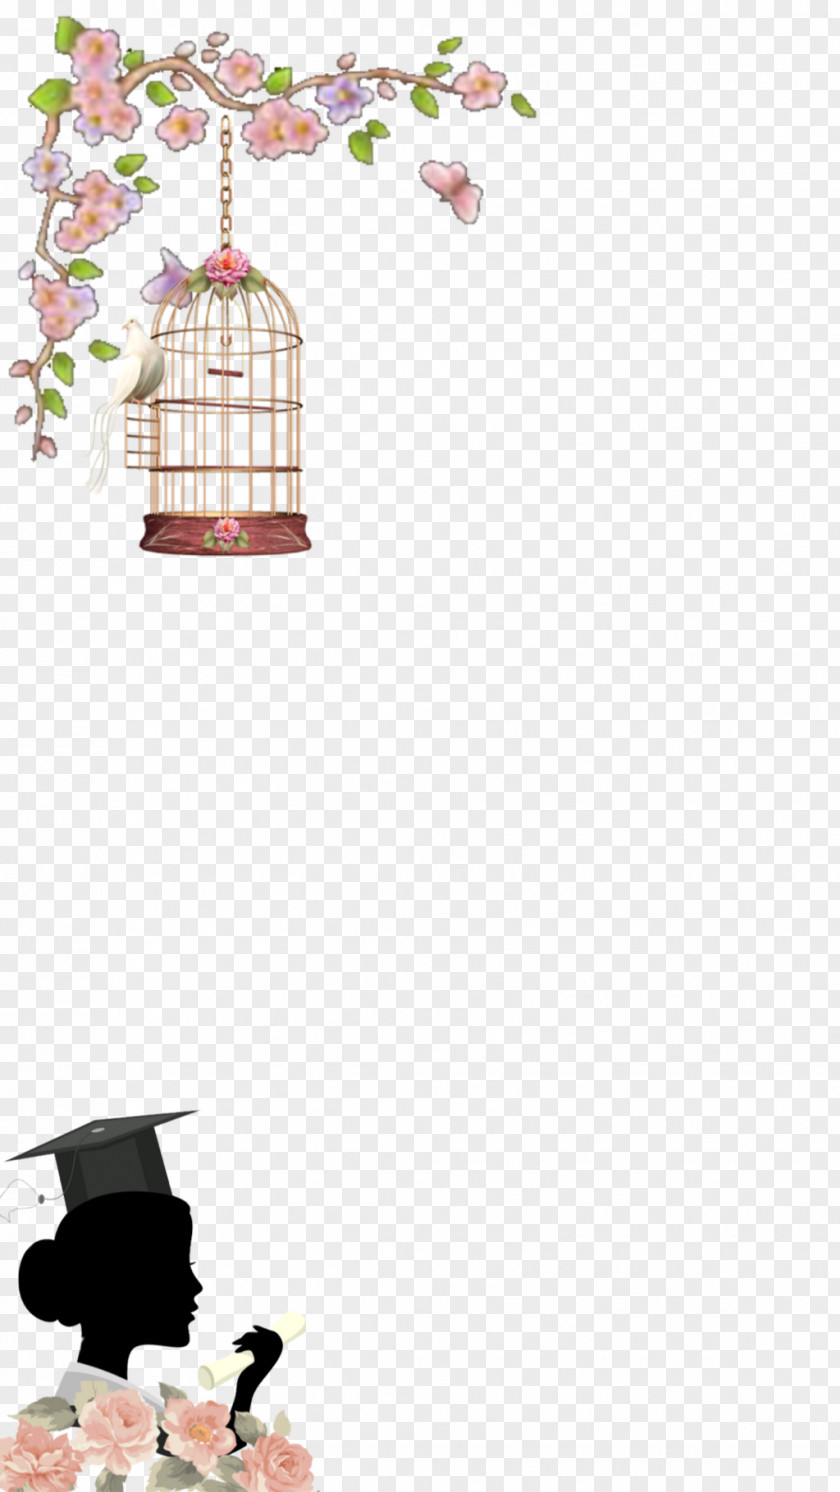 Graduation Element Background Hashtag Instagram Snapchat Tagged PNG